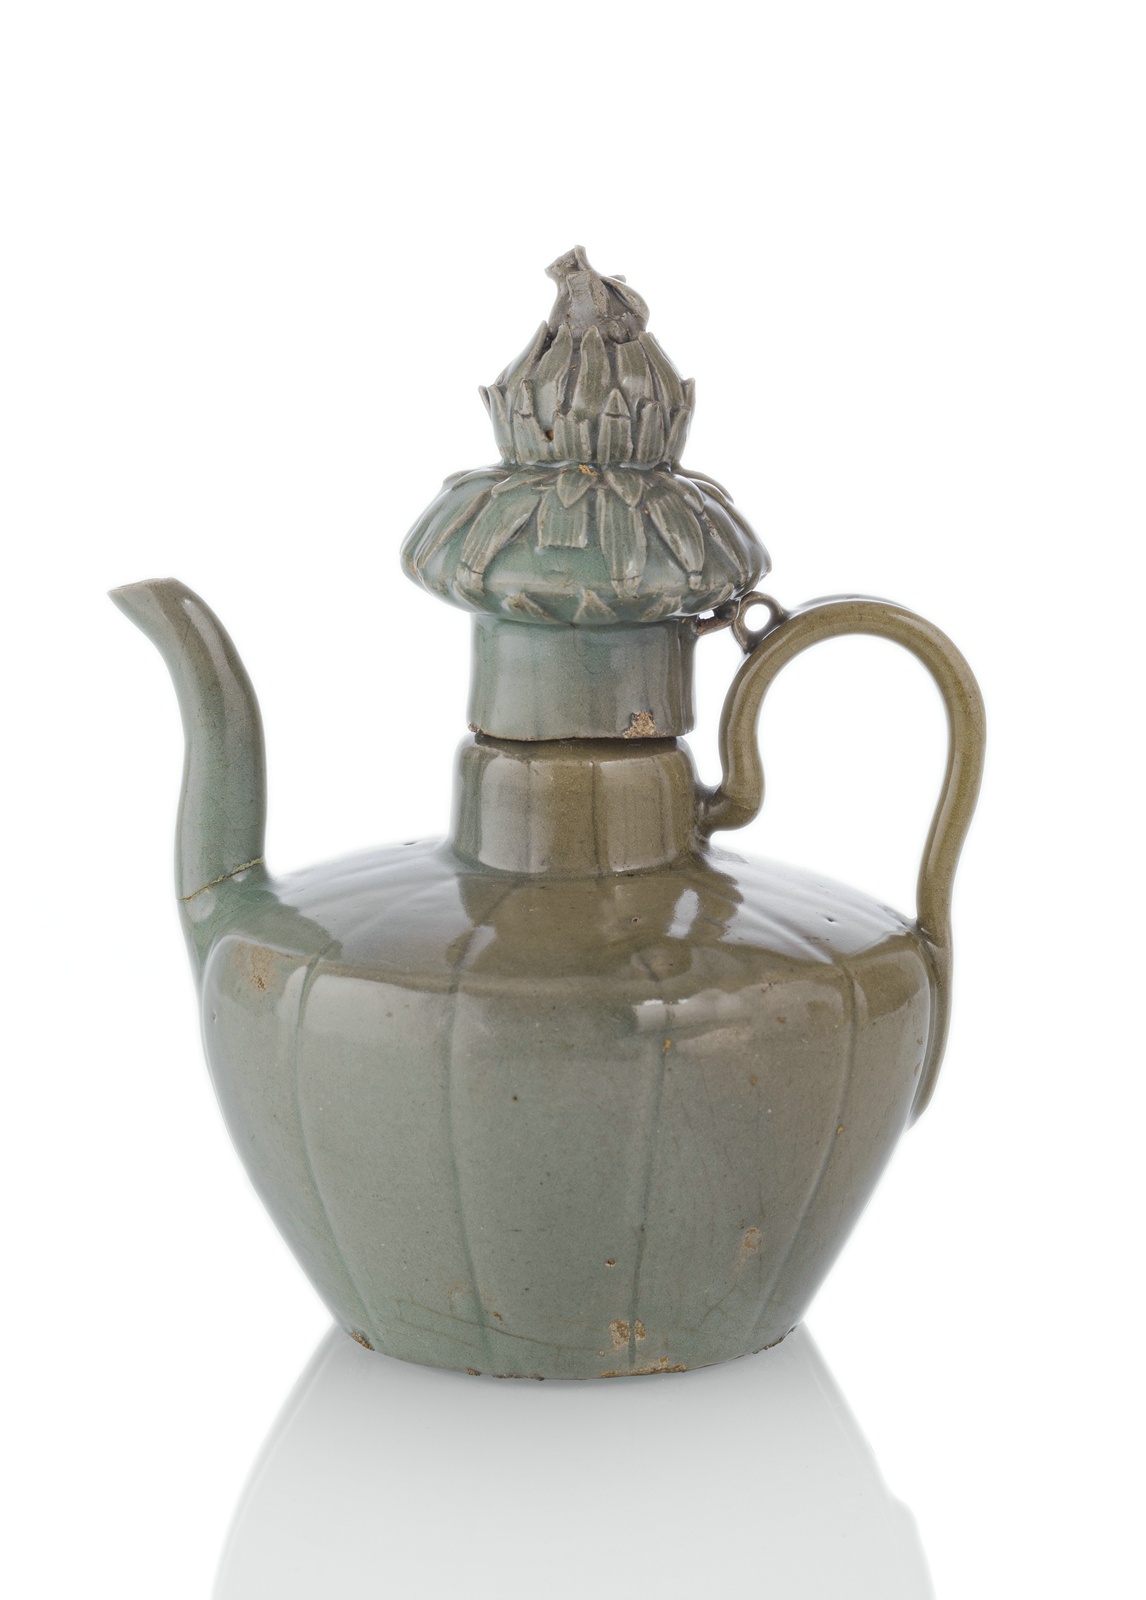 <b>A VERY RARE CELADON-GLAZED EWER WITH BLOSSOM-SHAPED COVER AND BIRD FINIAL</b>